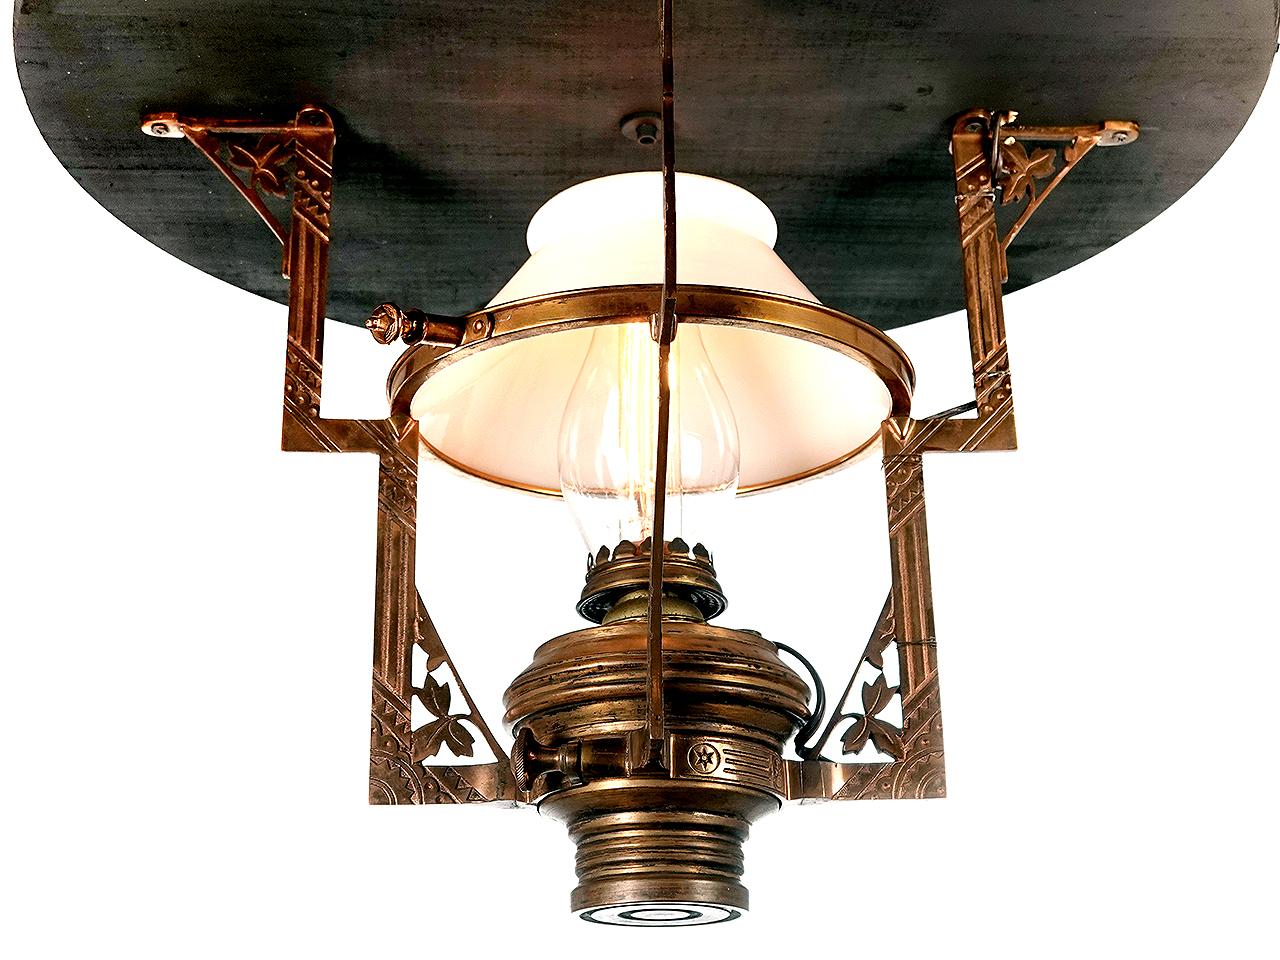 If you are a Railroad collector then you already know just how rare this lamp is. Its a No.33 Center Oil Lamp. Its a short drop fixture specifically designed for narrow gauge railroad cars. You may not find an original like this again outside a